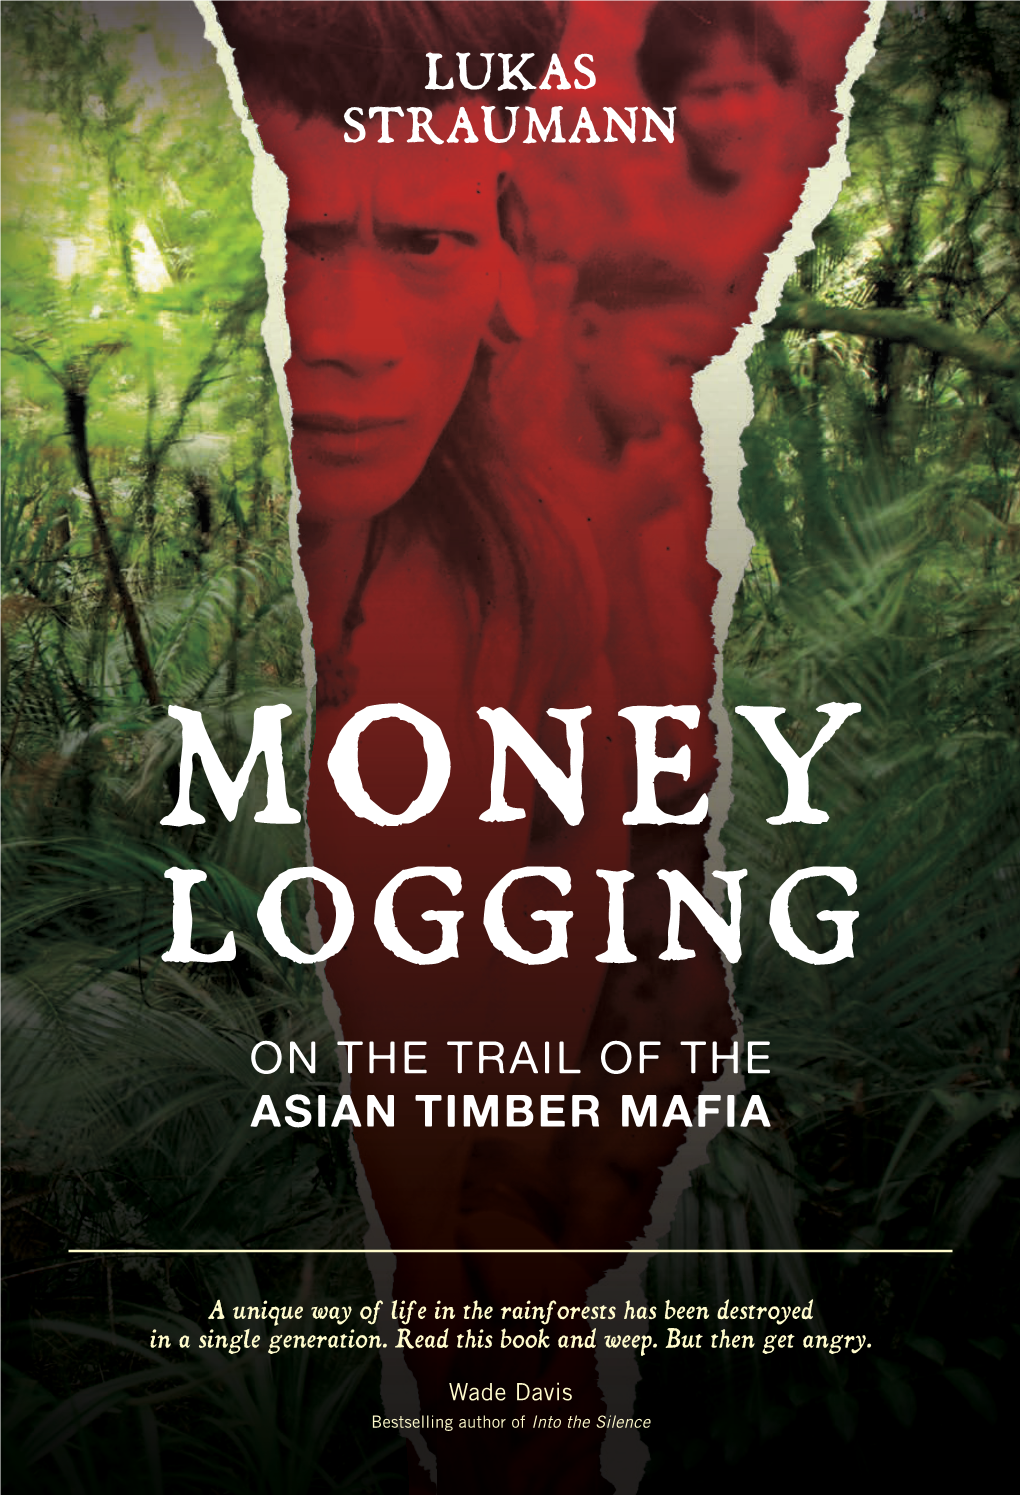 Logging on the Trail of the Asian Timber Mafia